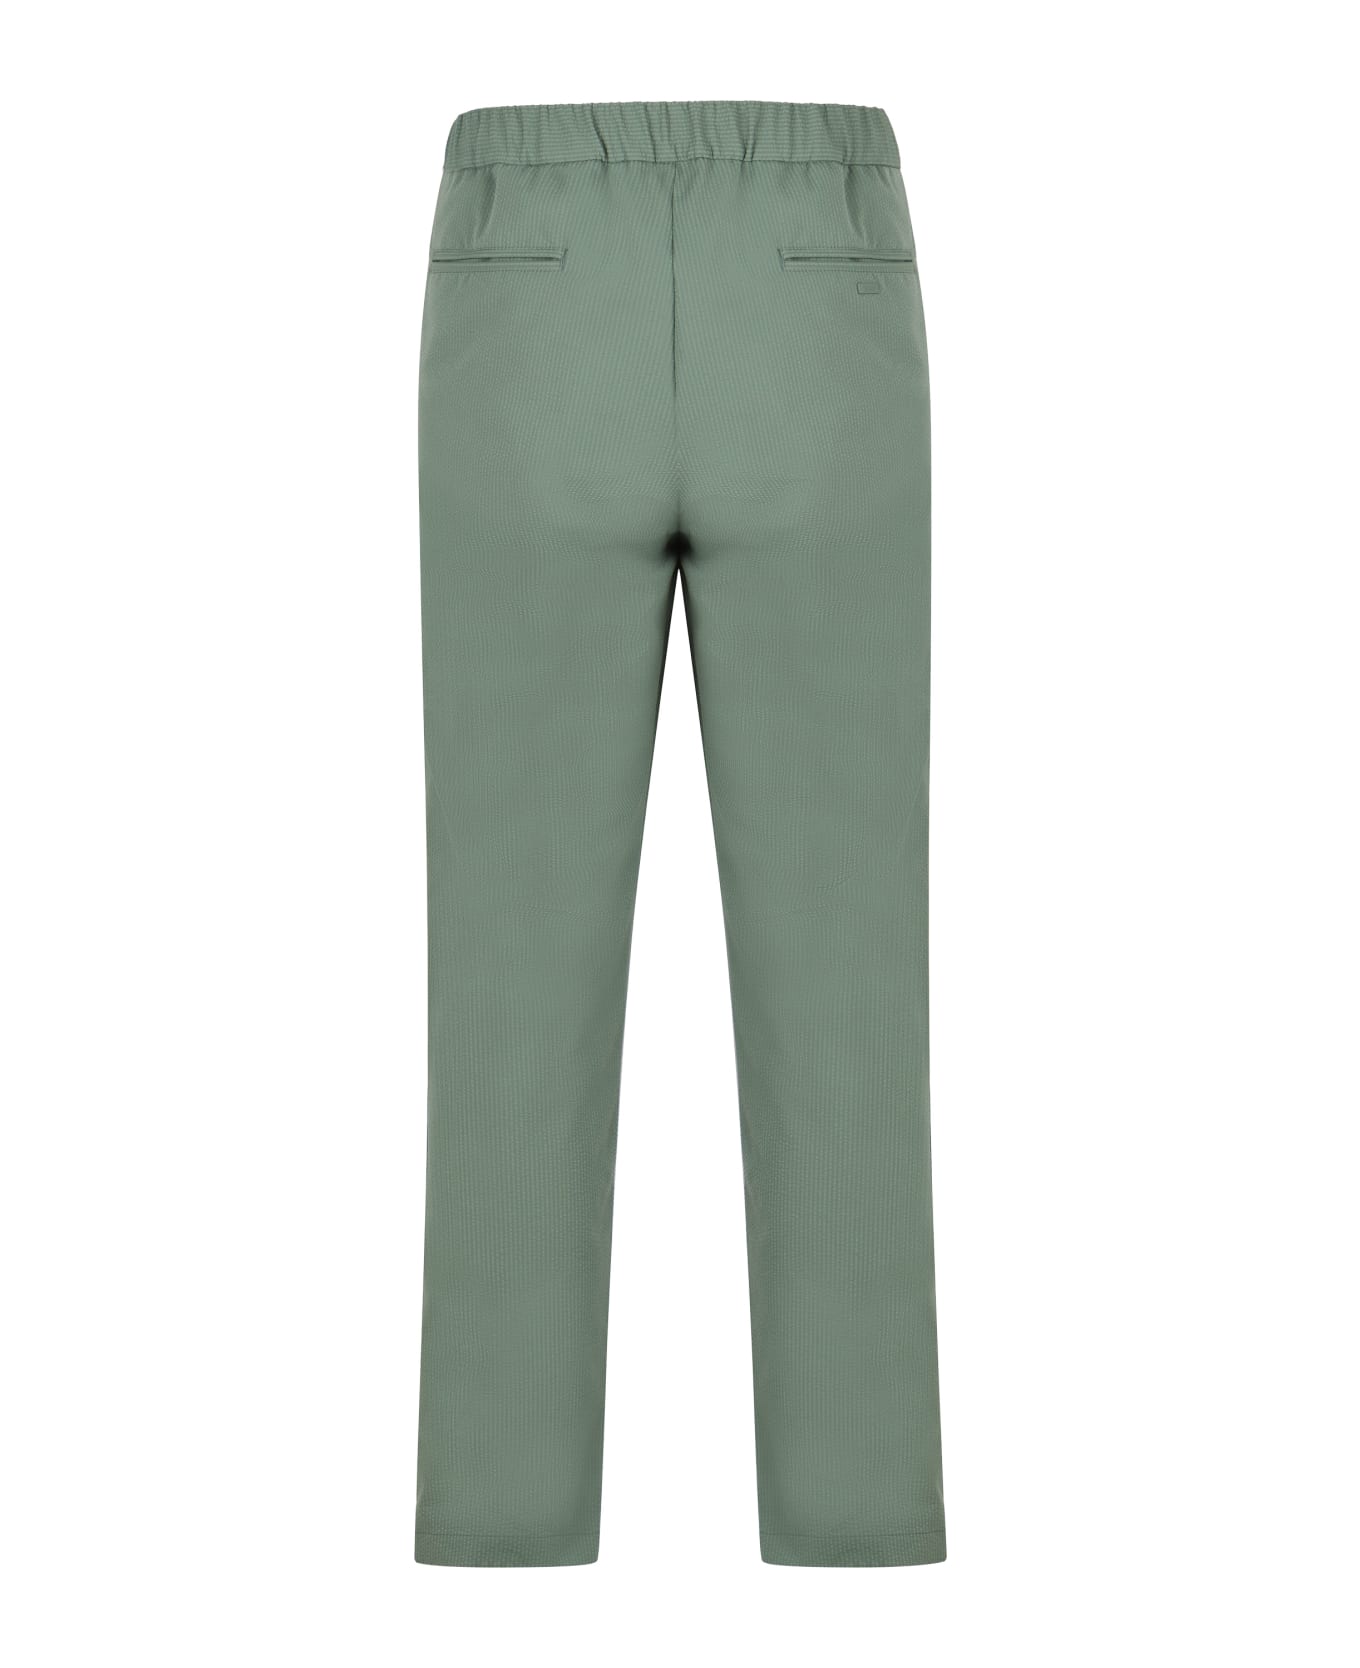 Herno Technical Fabric Pants - green